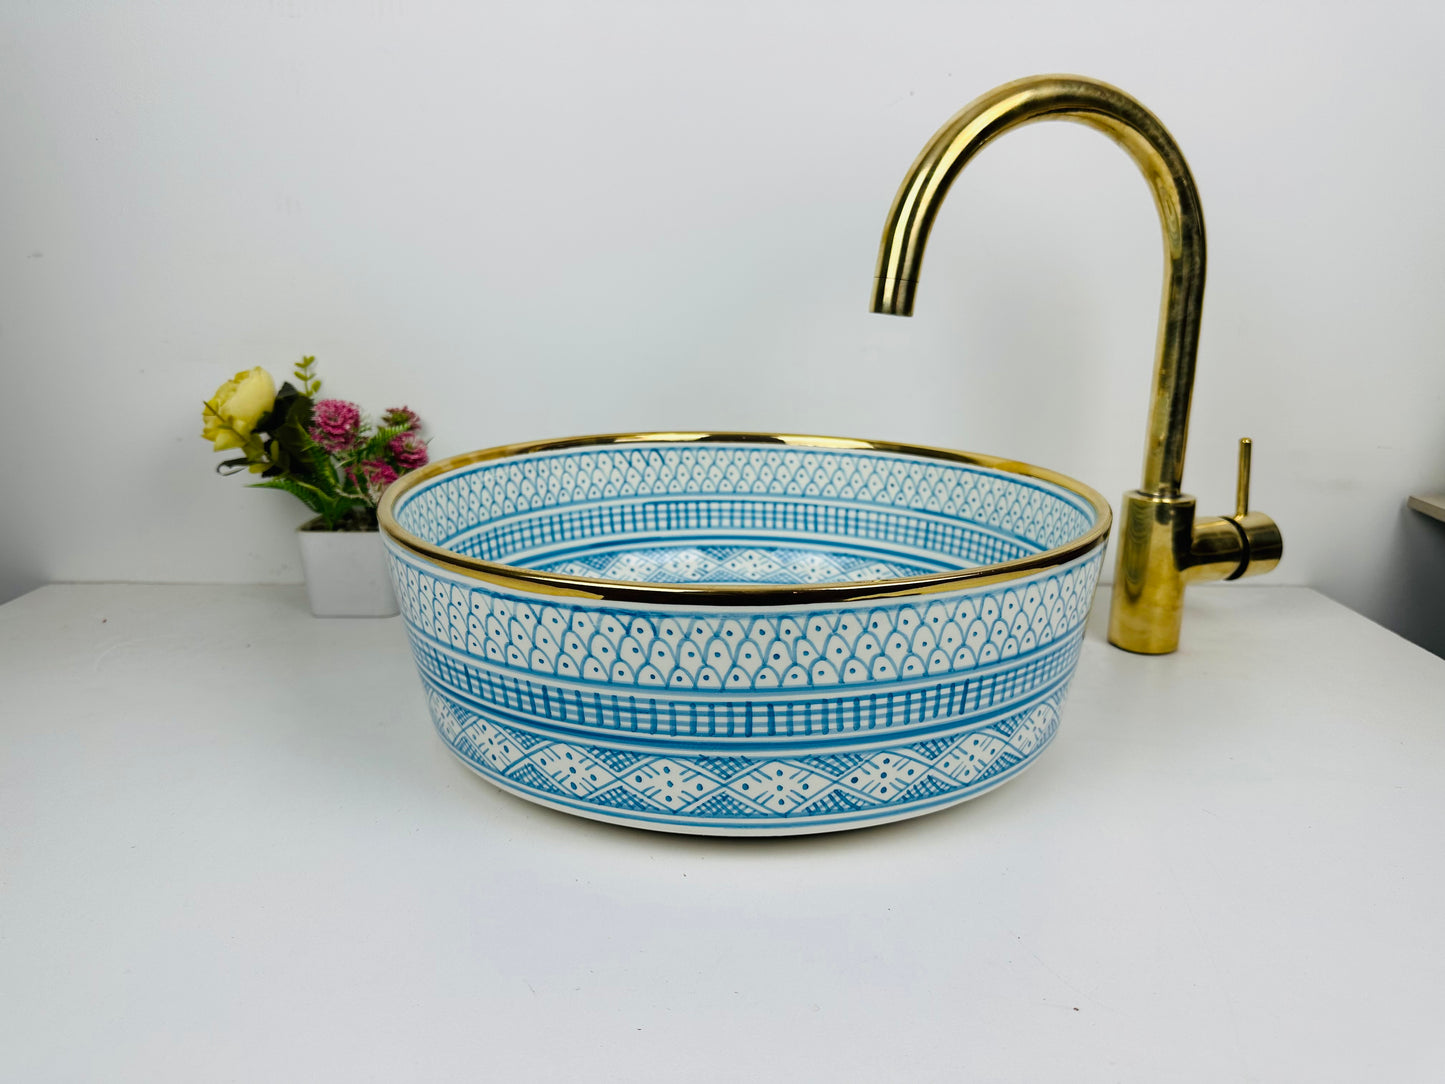 Skyline Classic: Handcrafted Ceramic Sink with Traditional Sky-Colored Design and 14k Gold